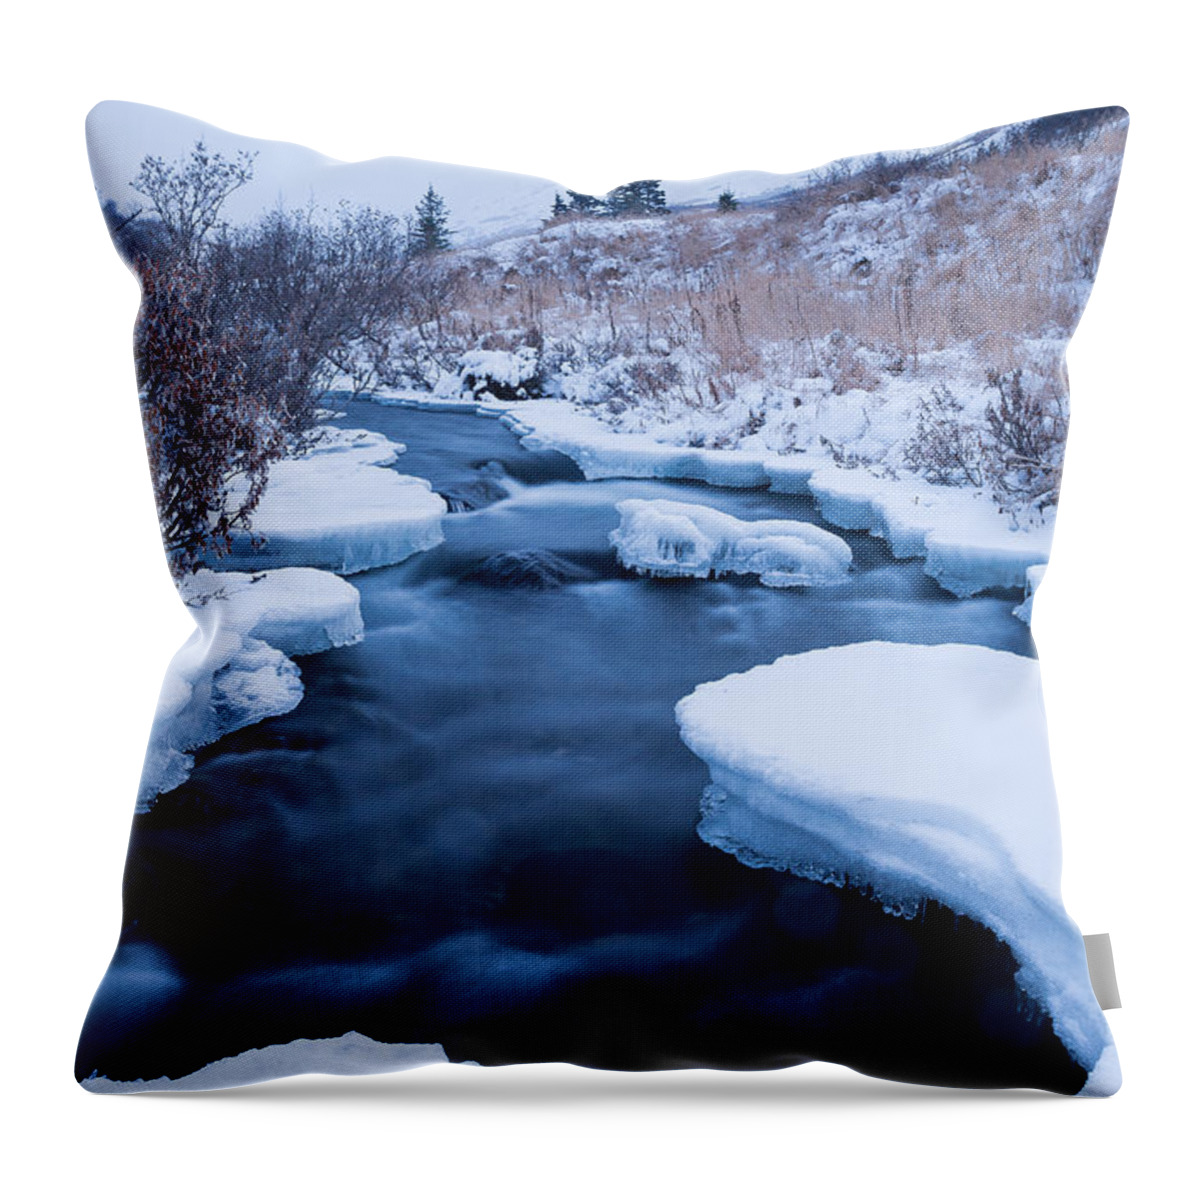 Alaska Throw Pillow featuring the photograph Settling Into Winter by Tim Newton